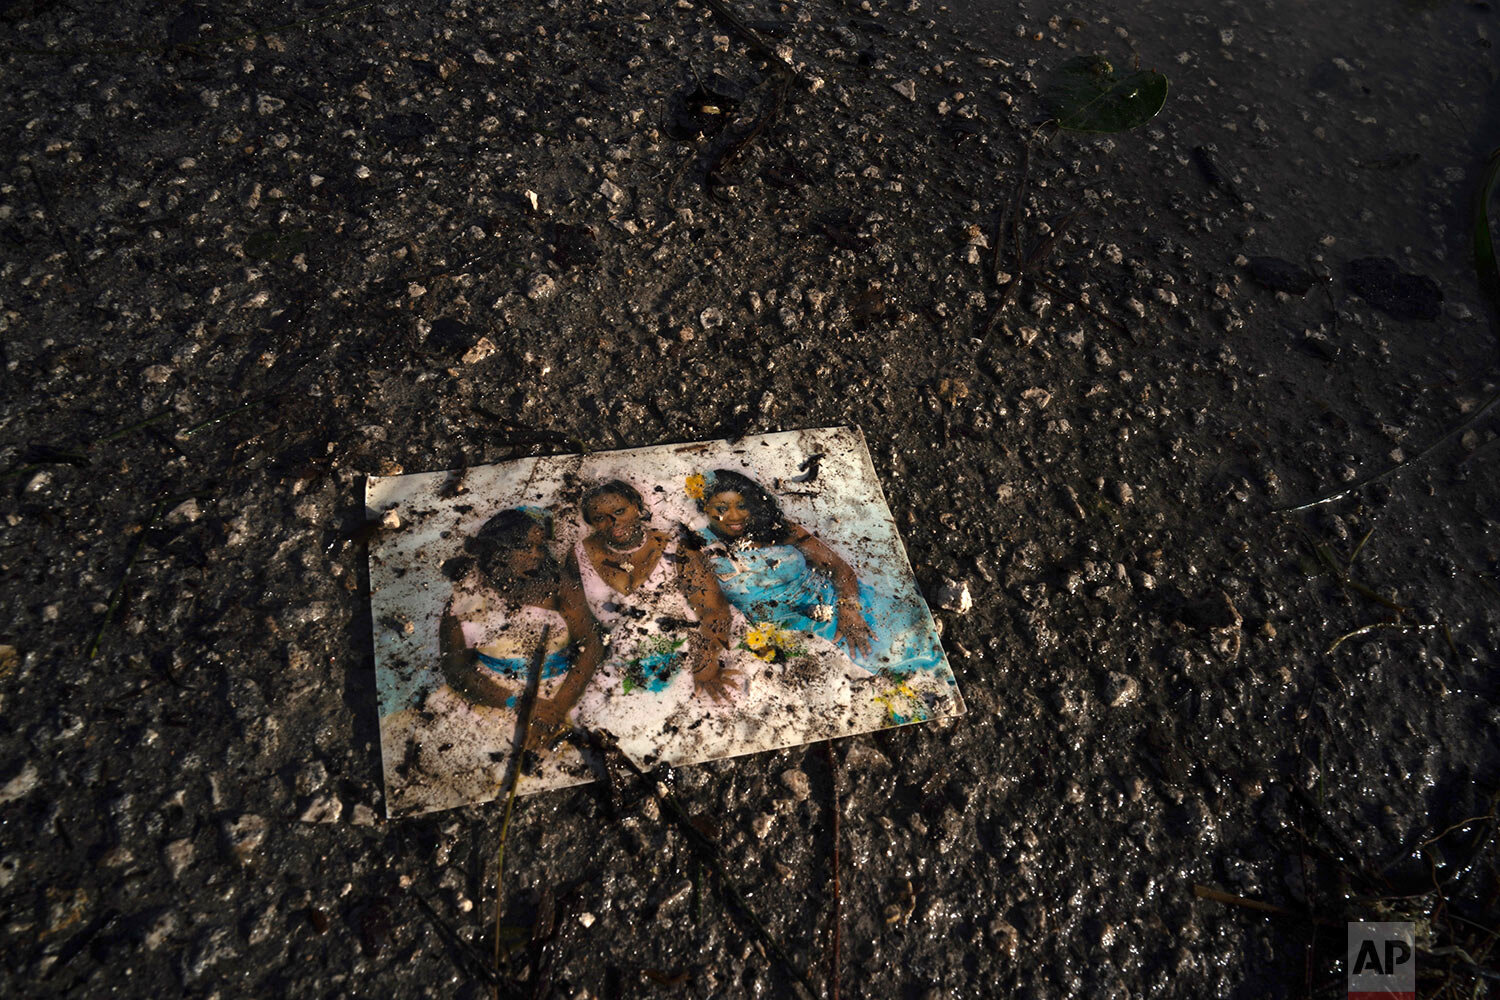  A family photo lies on a muddied road in the aftermath of Hurricane Dorian in Pine Bay, near Freeport, Bahamas, Wednesday, Sept. 4, 2019.  (AP Photo/Ramon Espinosa) 